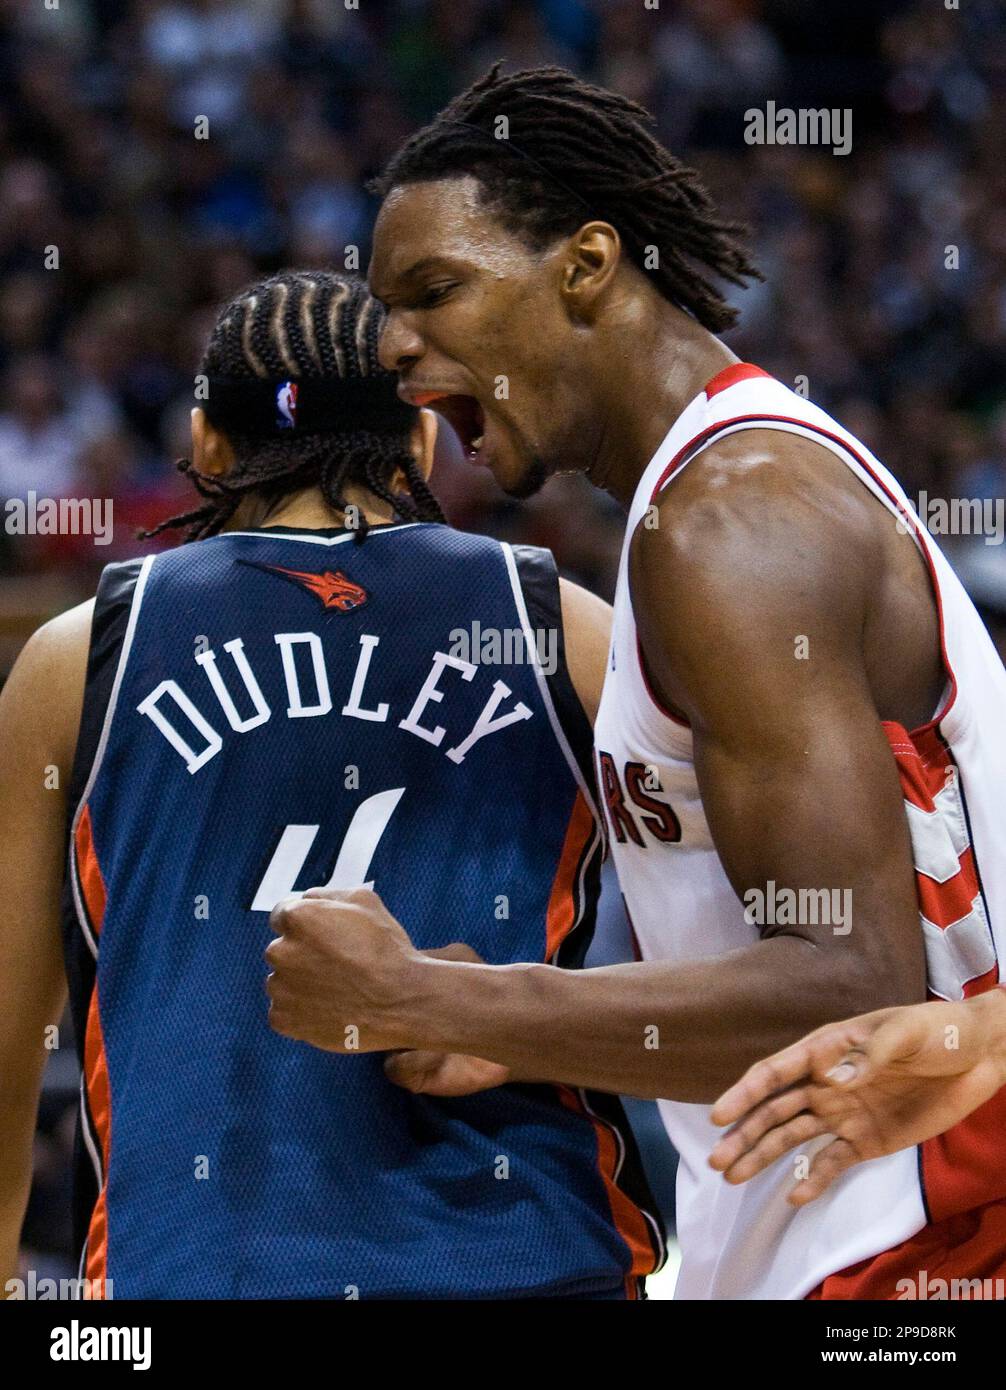 Toronto Raptors' Chris Bosh, right, reacts after a play as Charlotte Bobcats' Jared Dudley walks past during the second half of an NBA basketball game in Toronto on Wednesday, Nov. 26, 2008. (AP Photo/The Canadian Press, Nathan Denette) Stock Photo